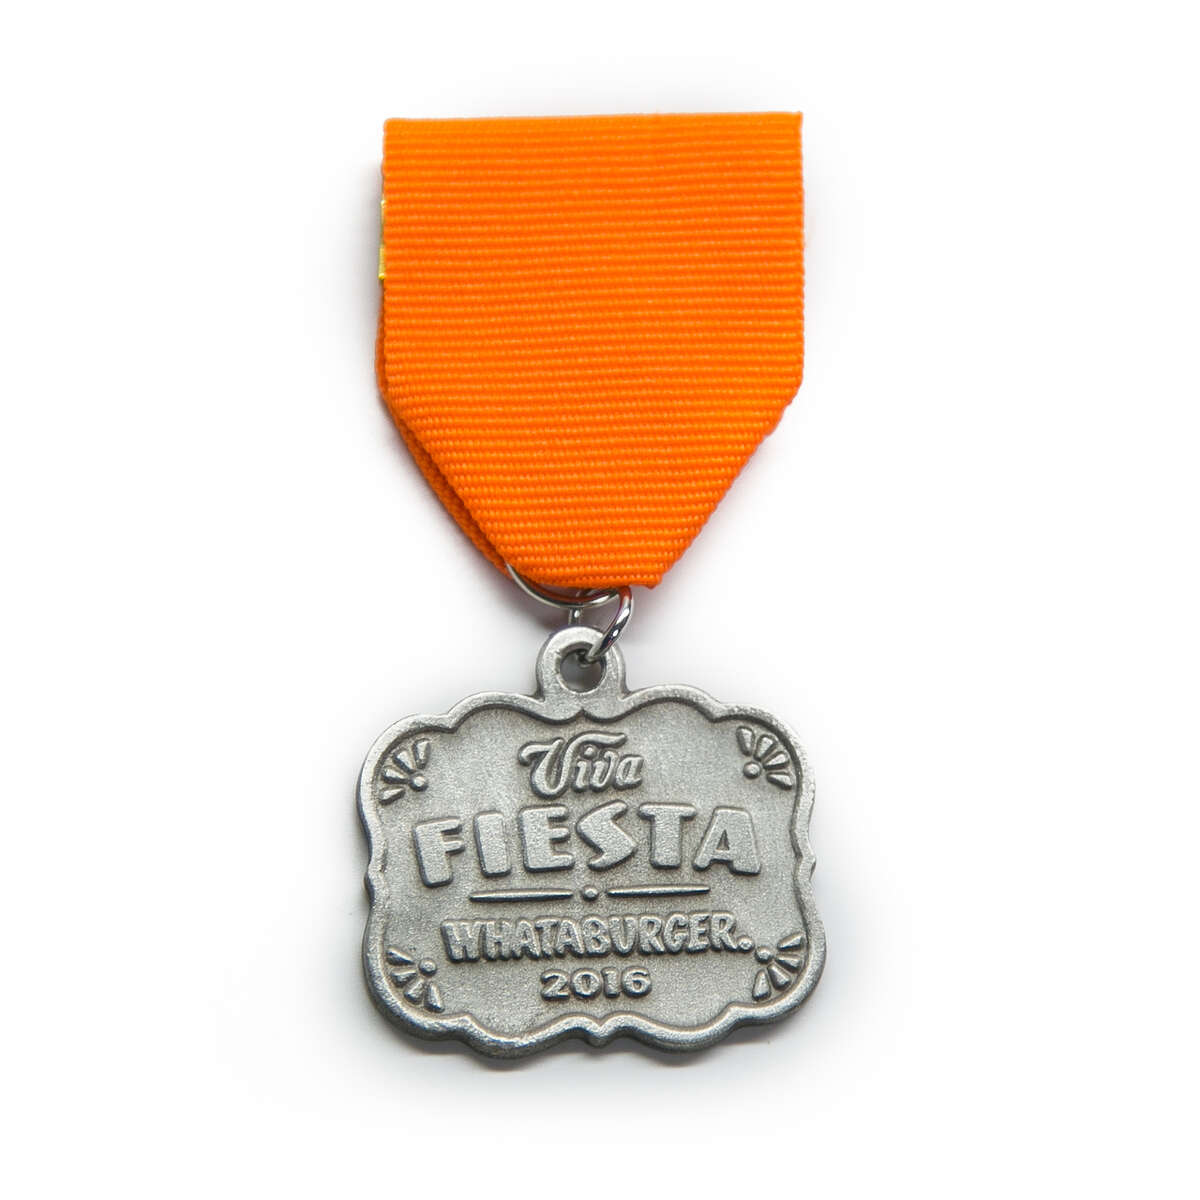 Whataburger has released the 2016 Fiesta medals for purchase on the company's website. The medals cost $9.99 each.